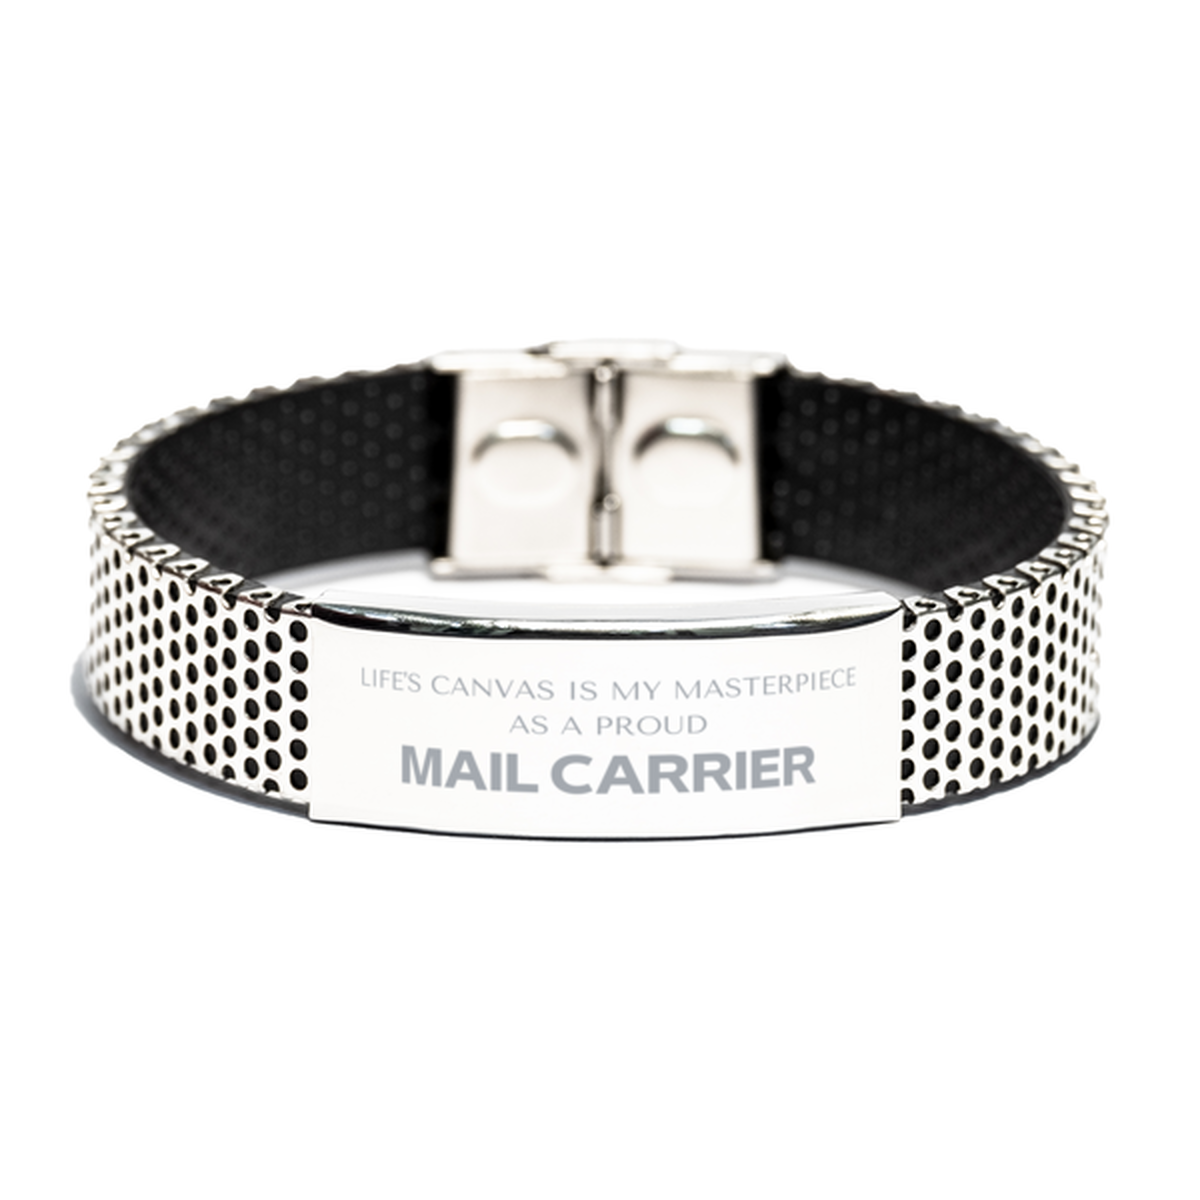 Proud Mail Carrier Gifts, Life's canvas is my masterpiece, Epic Birthday Christmas Unique Stainless Steel Bracelet For Mail Carrier, Coworkers, Men, Women, Friends